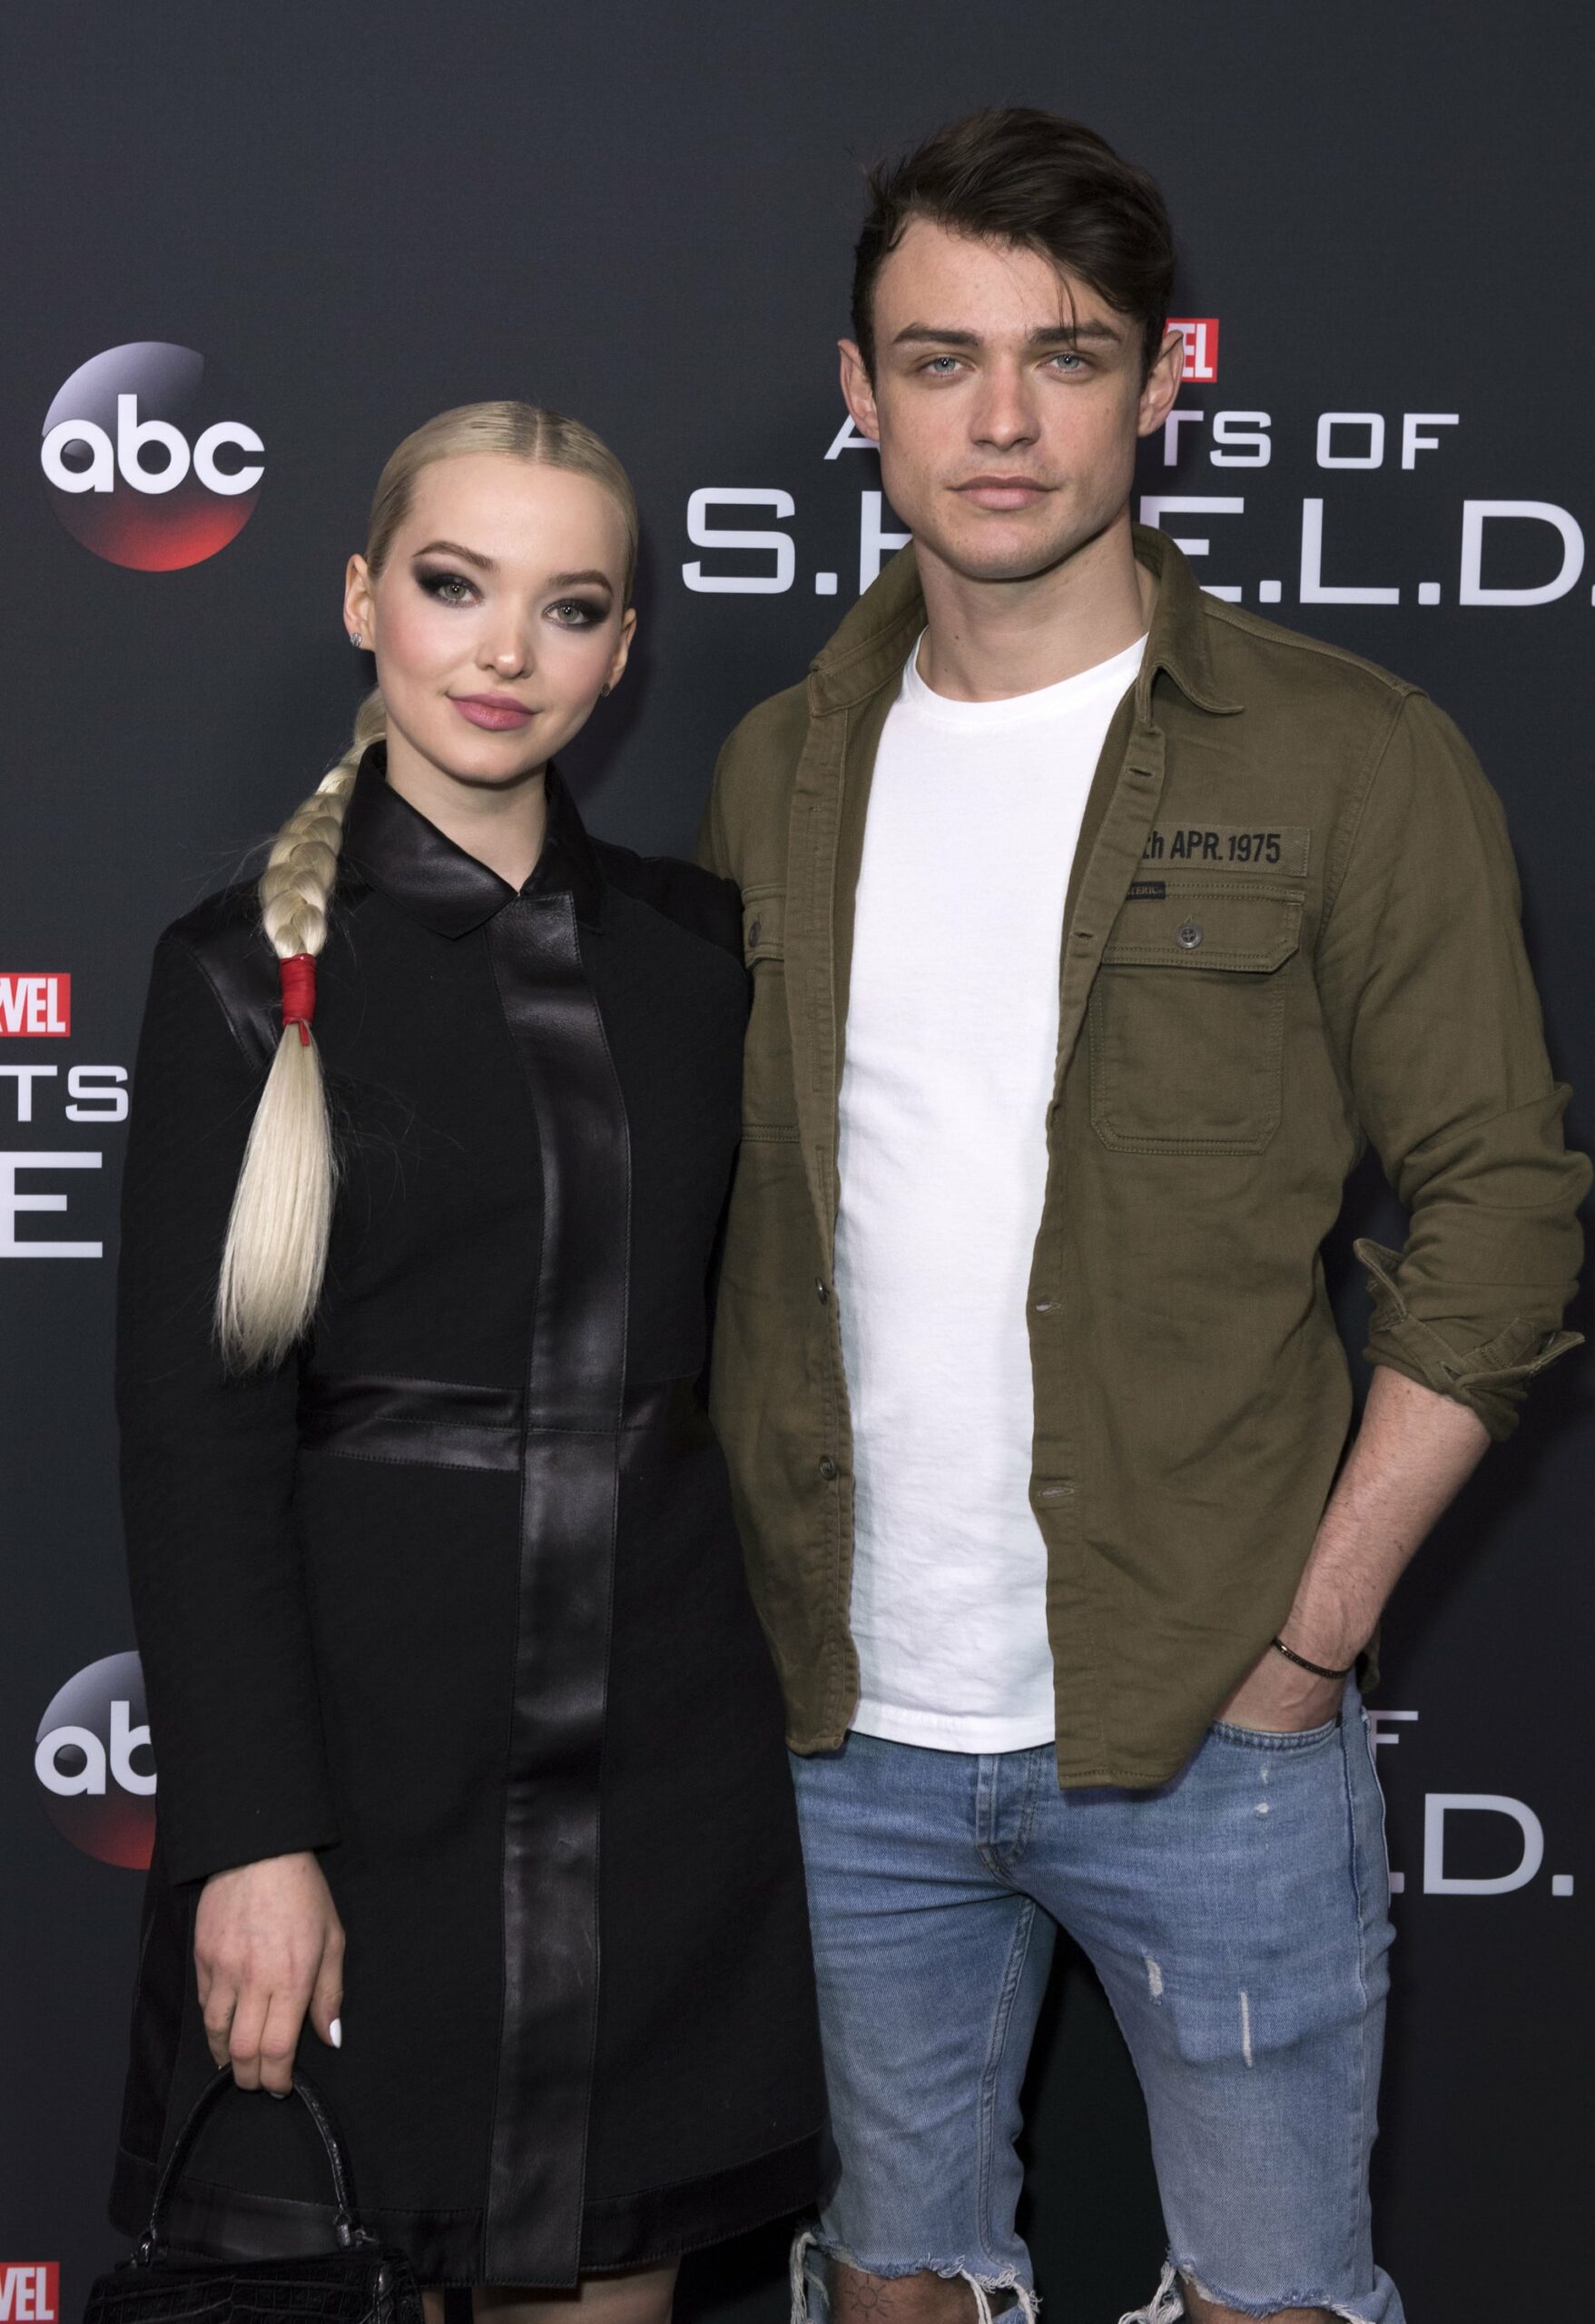 Actors Dove Cameron (L) and Thomas Doherty attend Marvels Agents of S.H.I.E.L.D. 100th Episode Celebration in Hollywood, California, on February 24, 2018.  / AFP PHOTO / VALERIE MACON        (Photo credit should read VALERIE MACON/AFP/Getty Images)